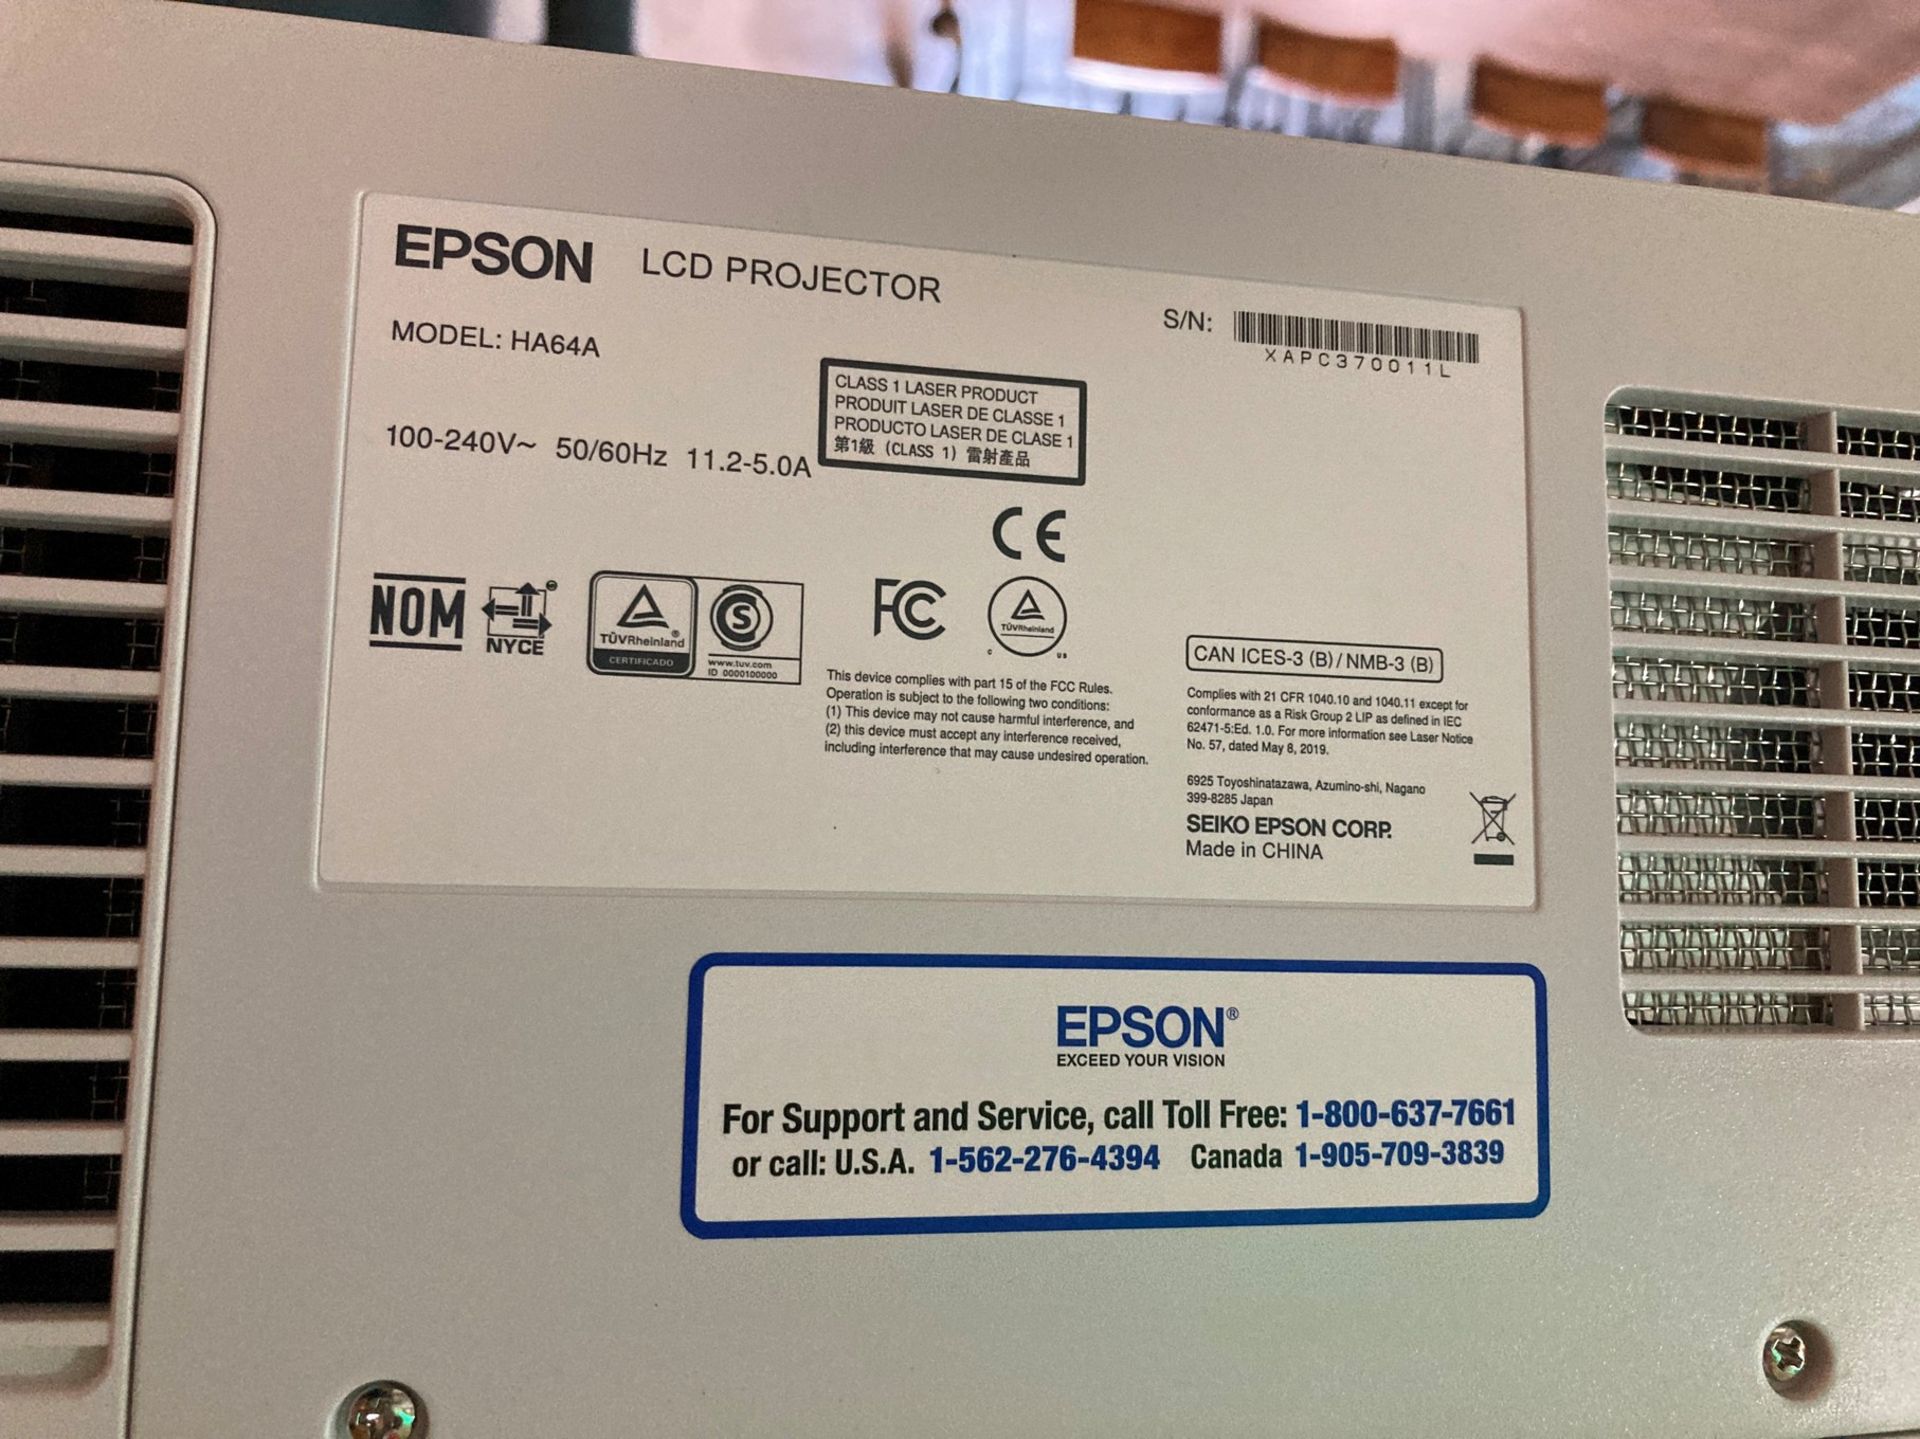 ****EPSON MODEL HA64A LCD PROJECTOR; S/N XAPL370011L WITH LENS AND 240" WIDE SCREEN & FRAME - - Image 2 of 9